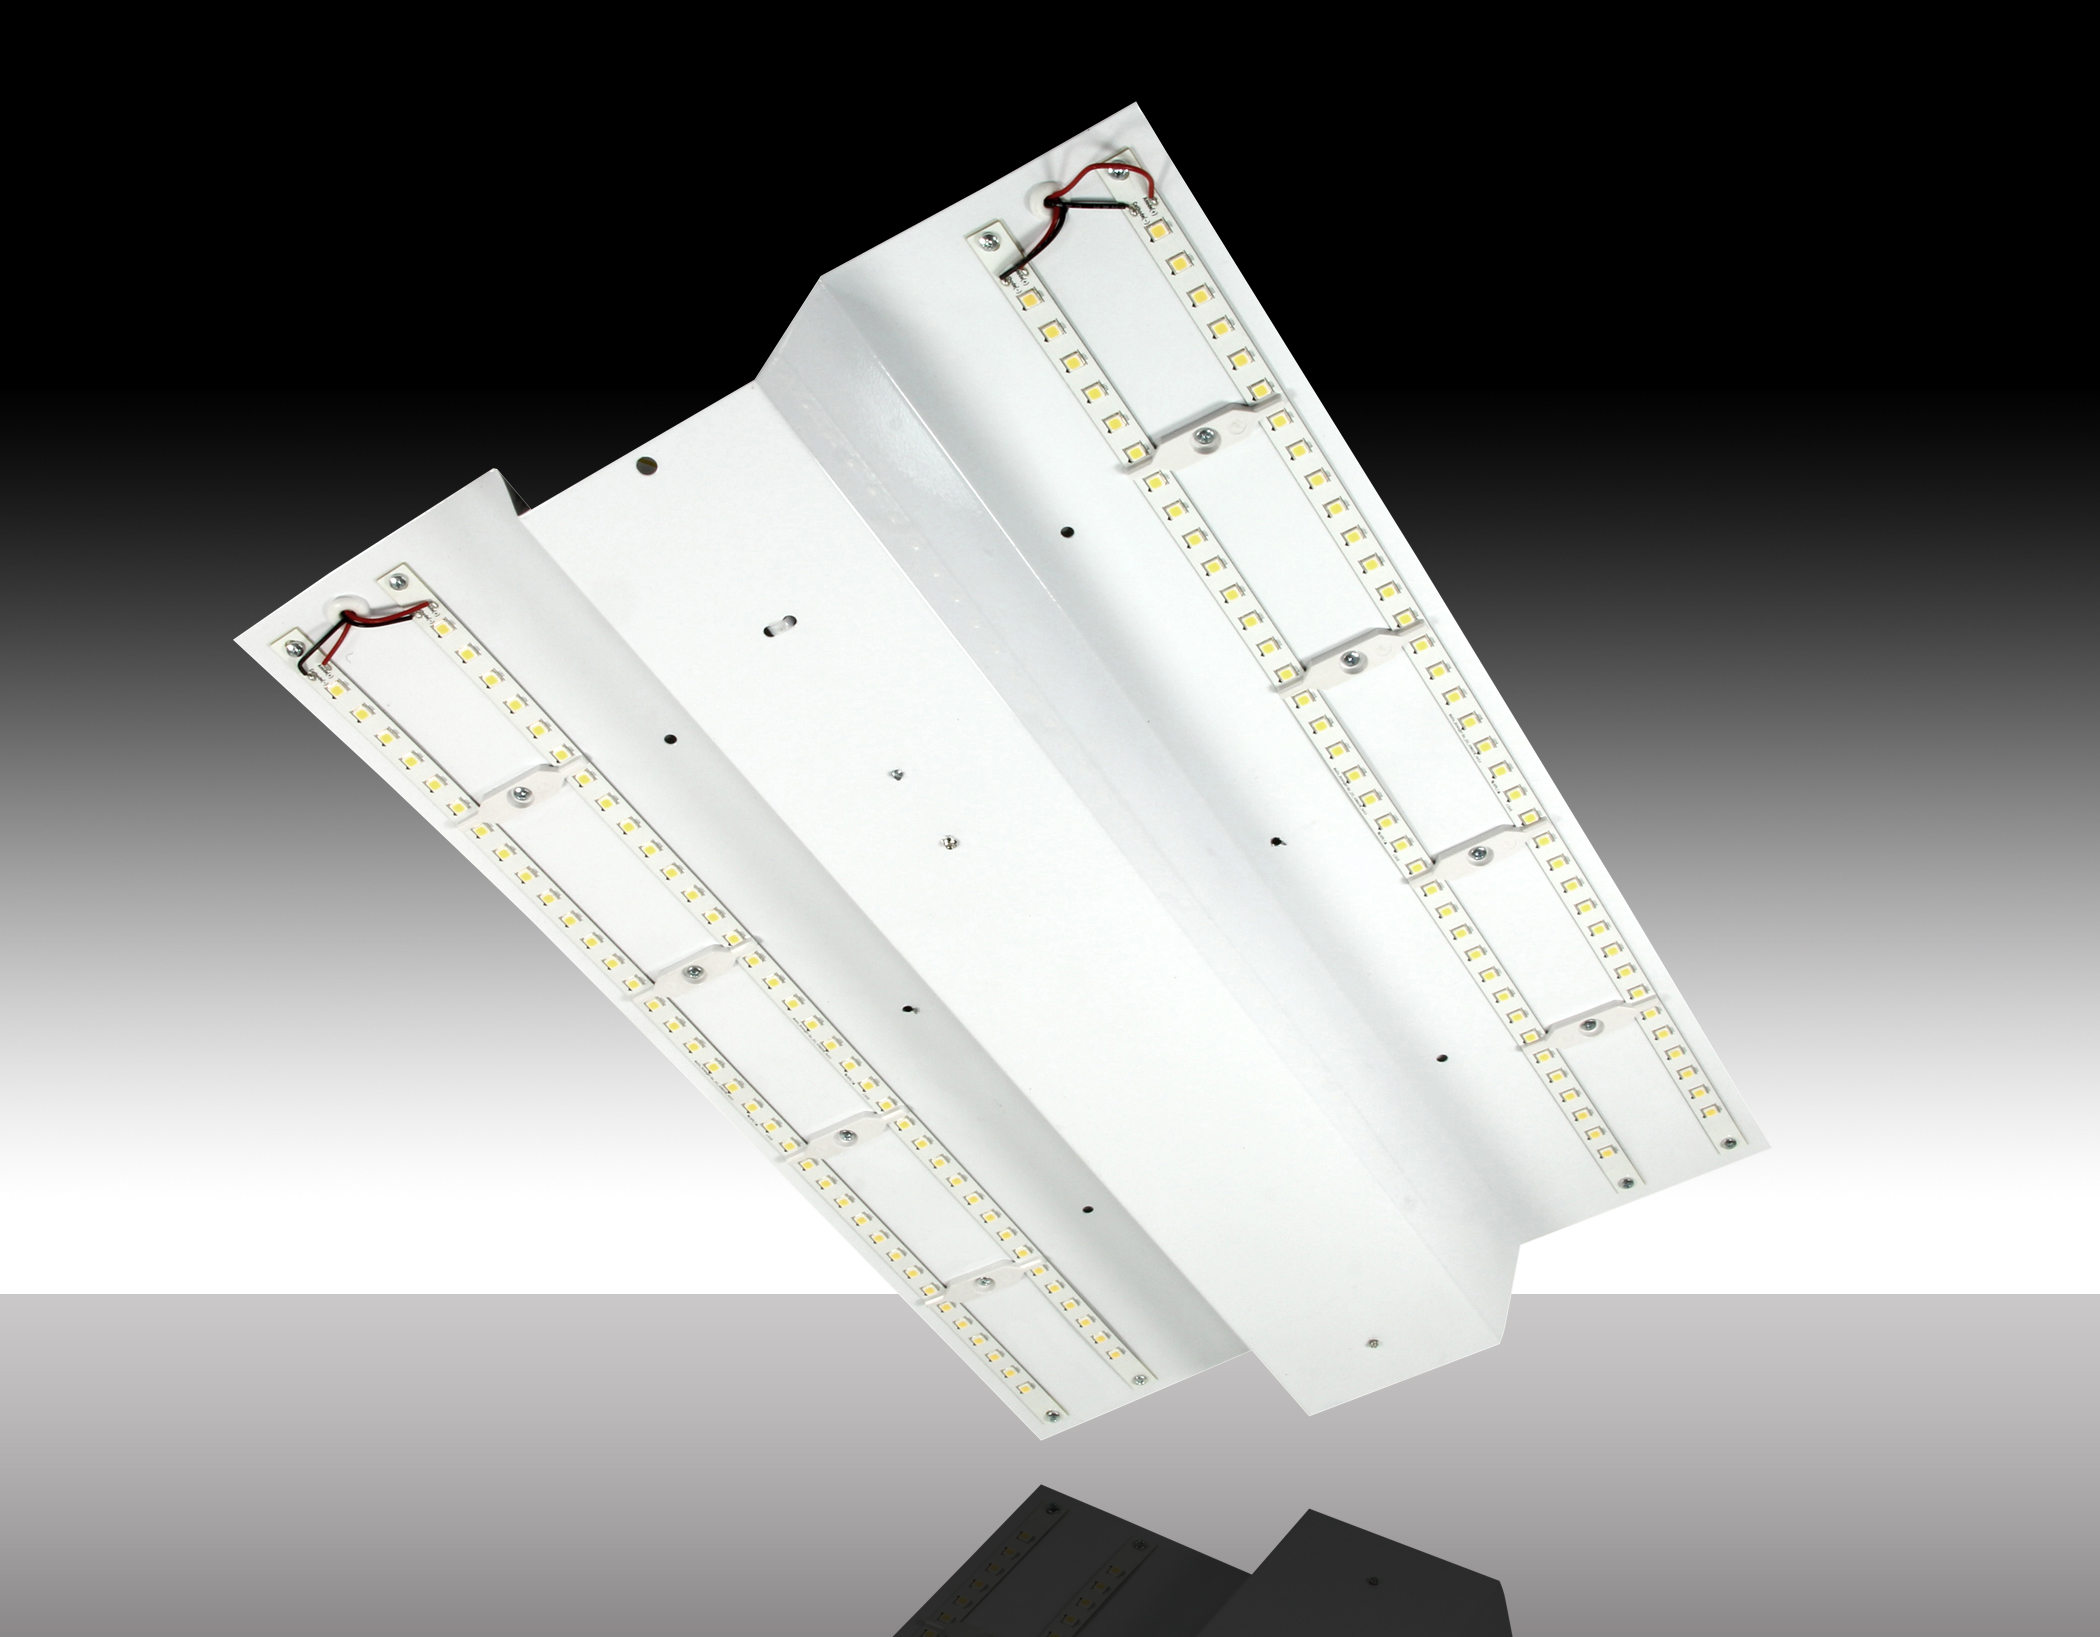 MaxLite’s DLC-qualified Recessed Troffer Retrofit Kits offer seamless switch to LED lighting